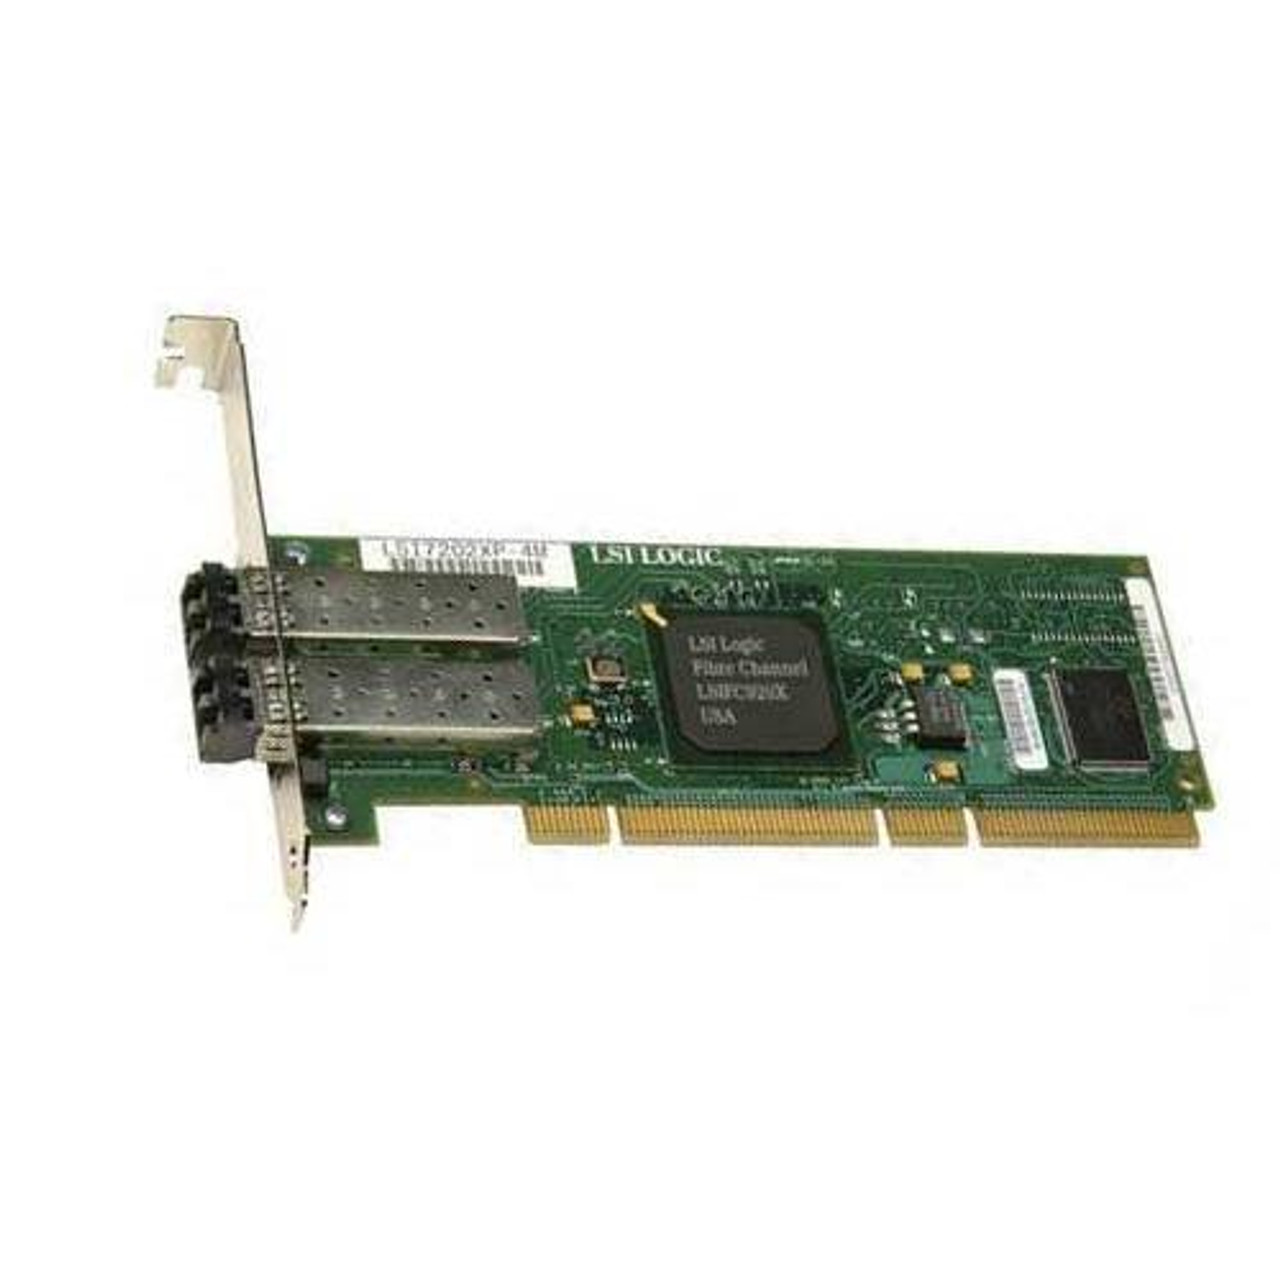 9131-5759 IBM 4Gbps DDR Dual-Ports Fibre Channel Gigabit Ethernet PCI-X 2.0 Network Adapter (5759)